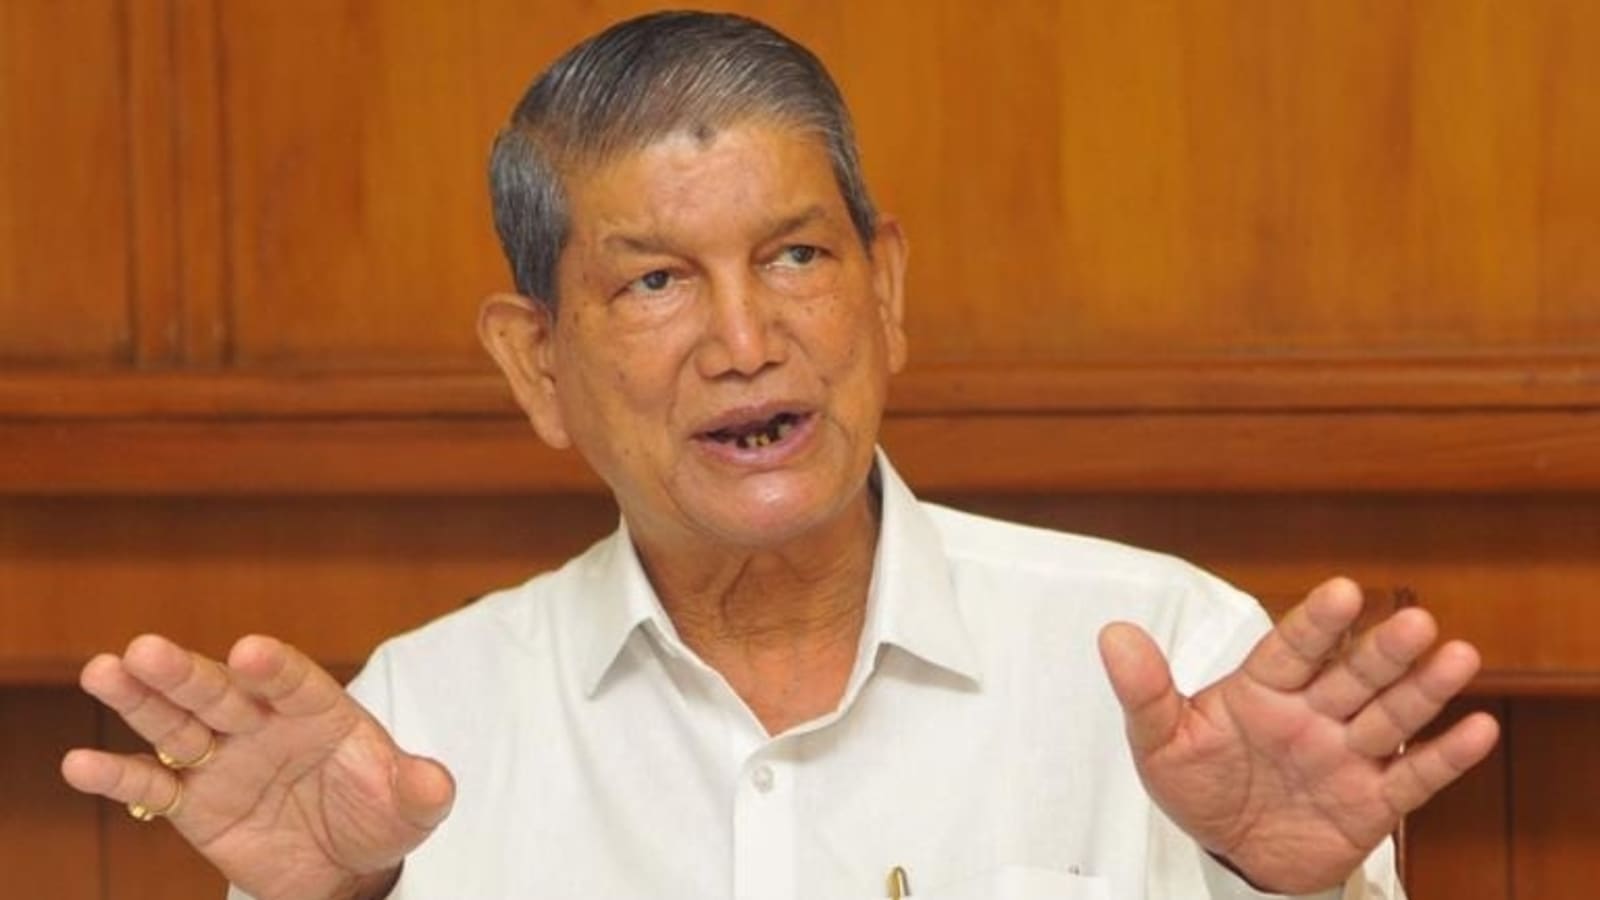 Amarinder Singh wasn't insulted by Congress, should rethink move: Harish Rawat - Hindustan Times